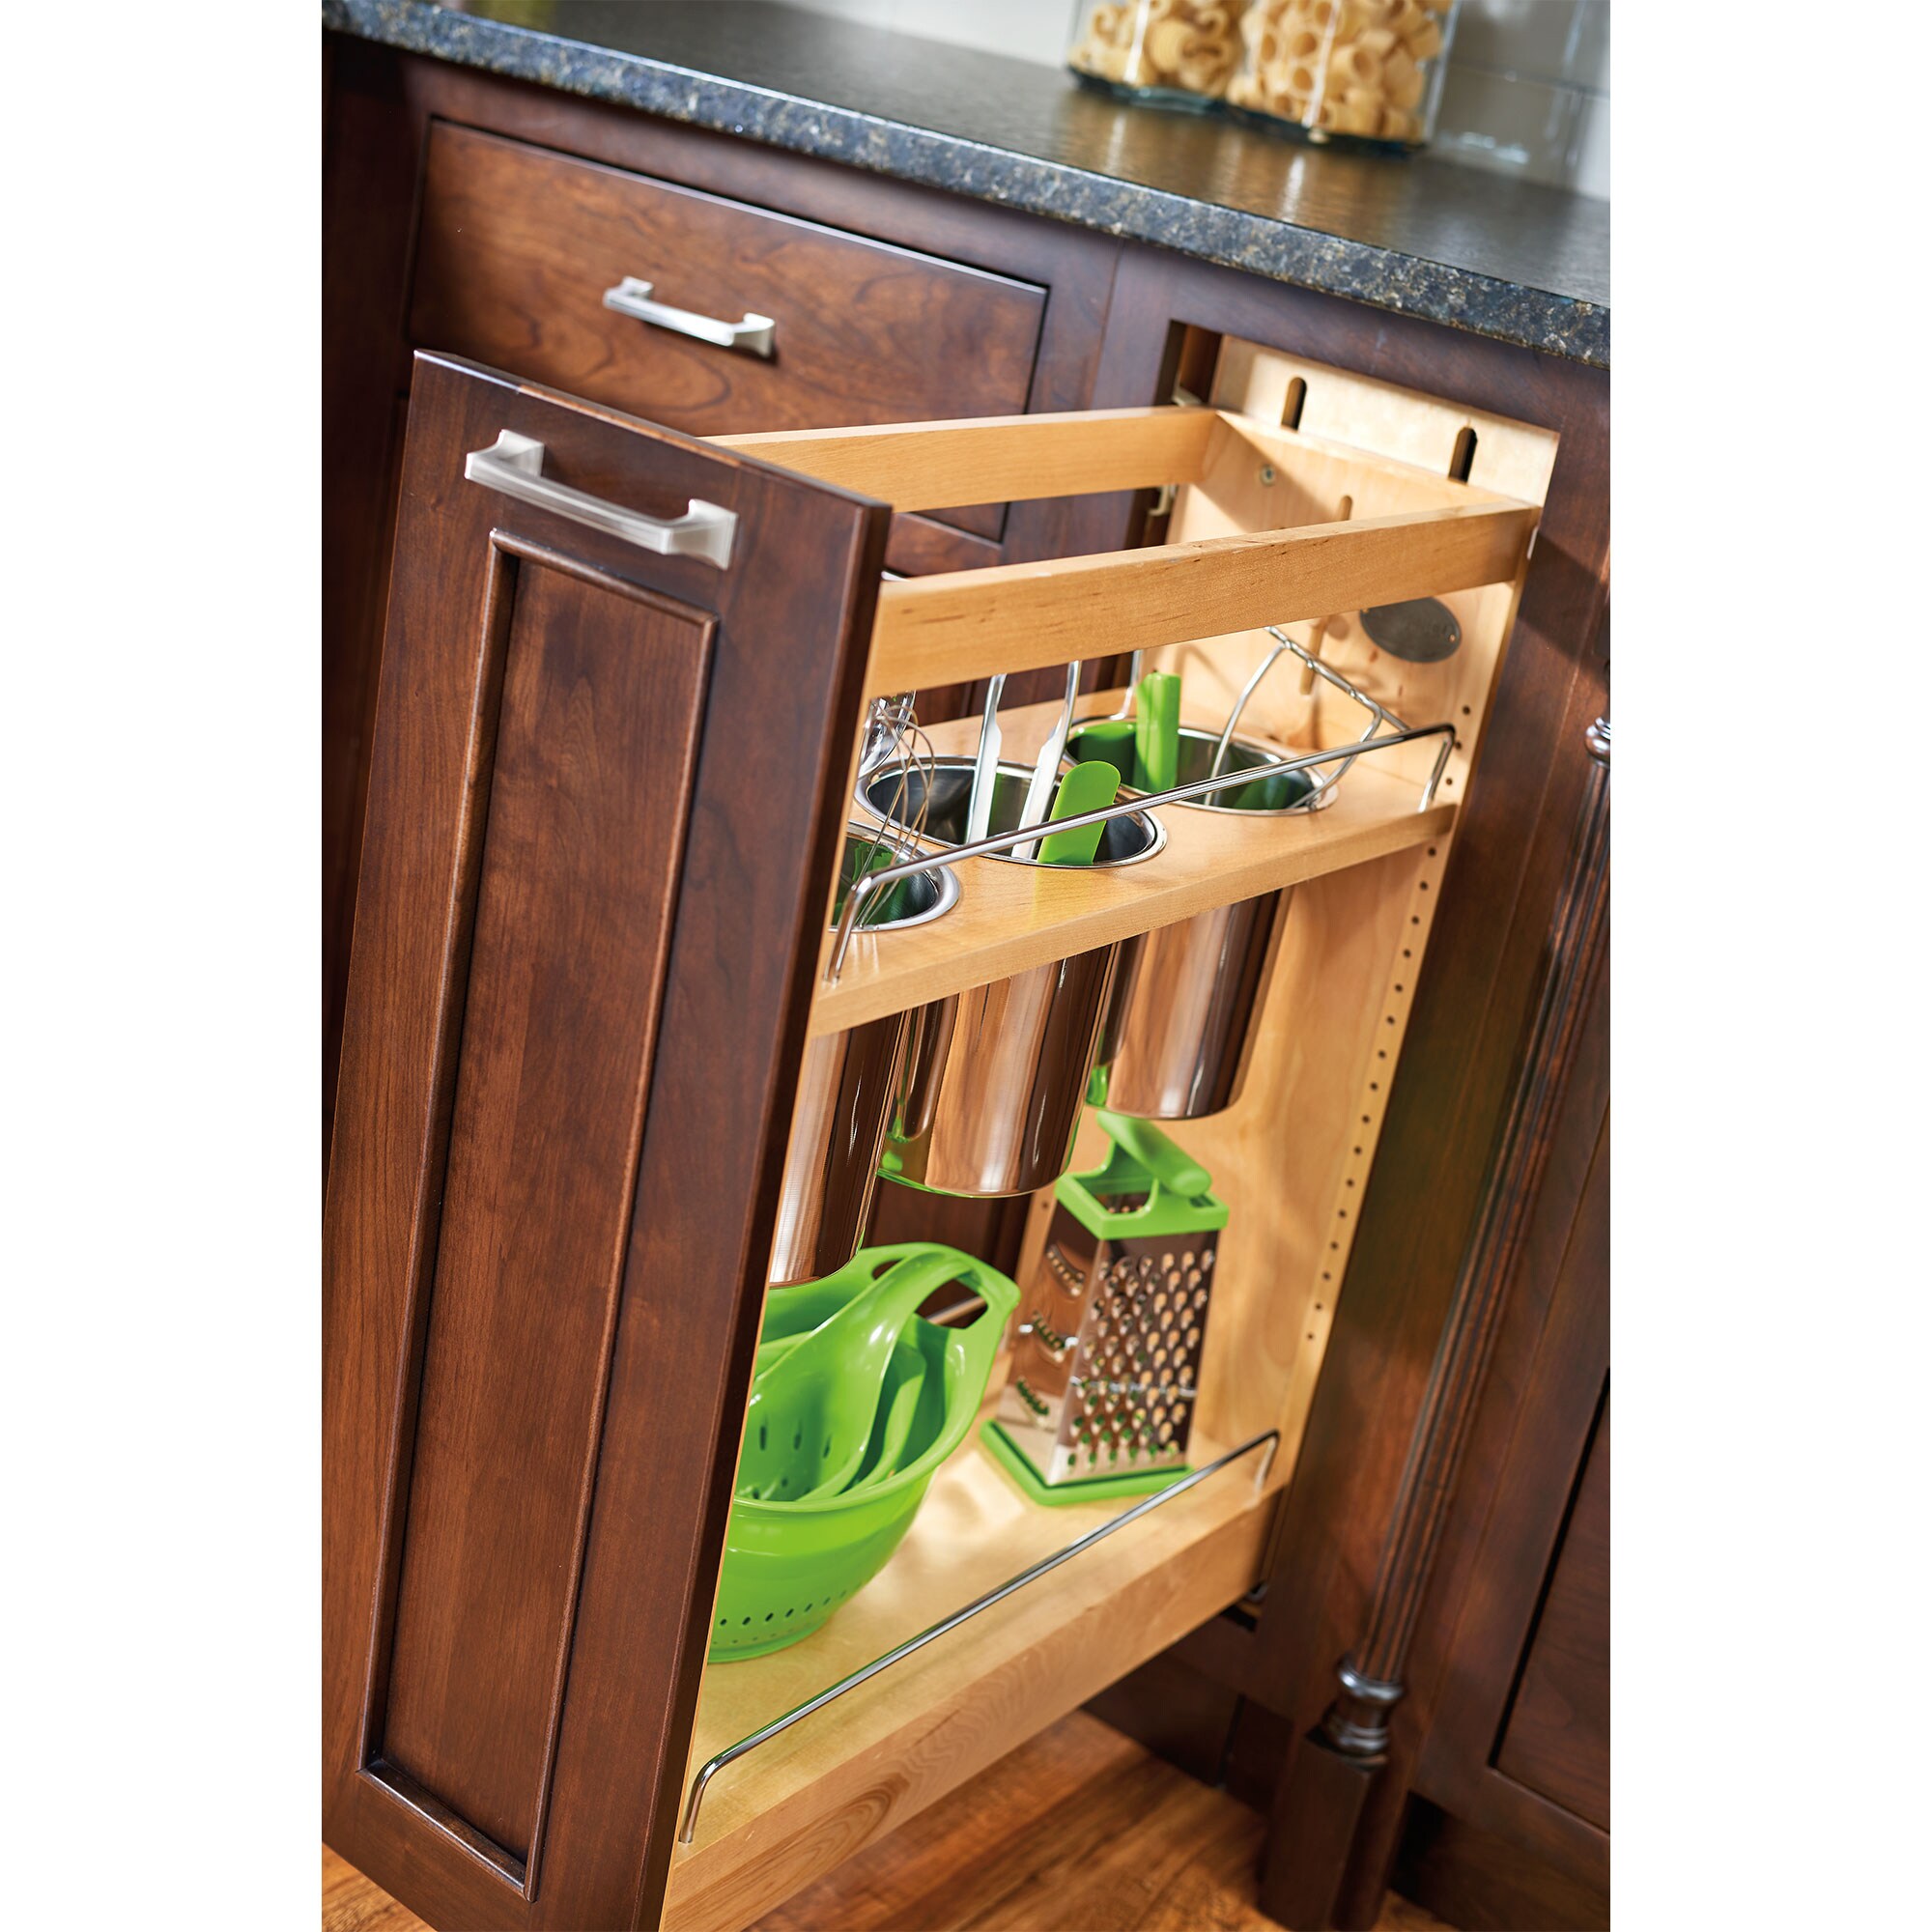 Rev-A-Shelf Wood Cabinet Pull Out Drawer with Soft Close & Reviews